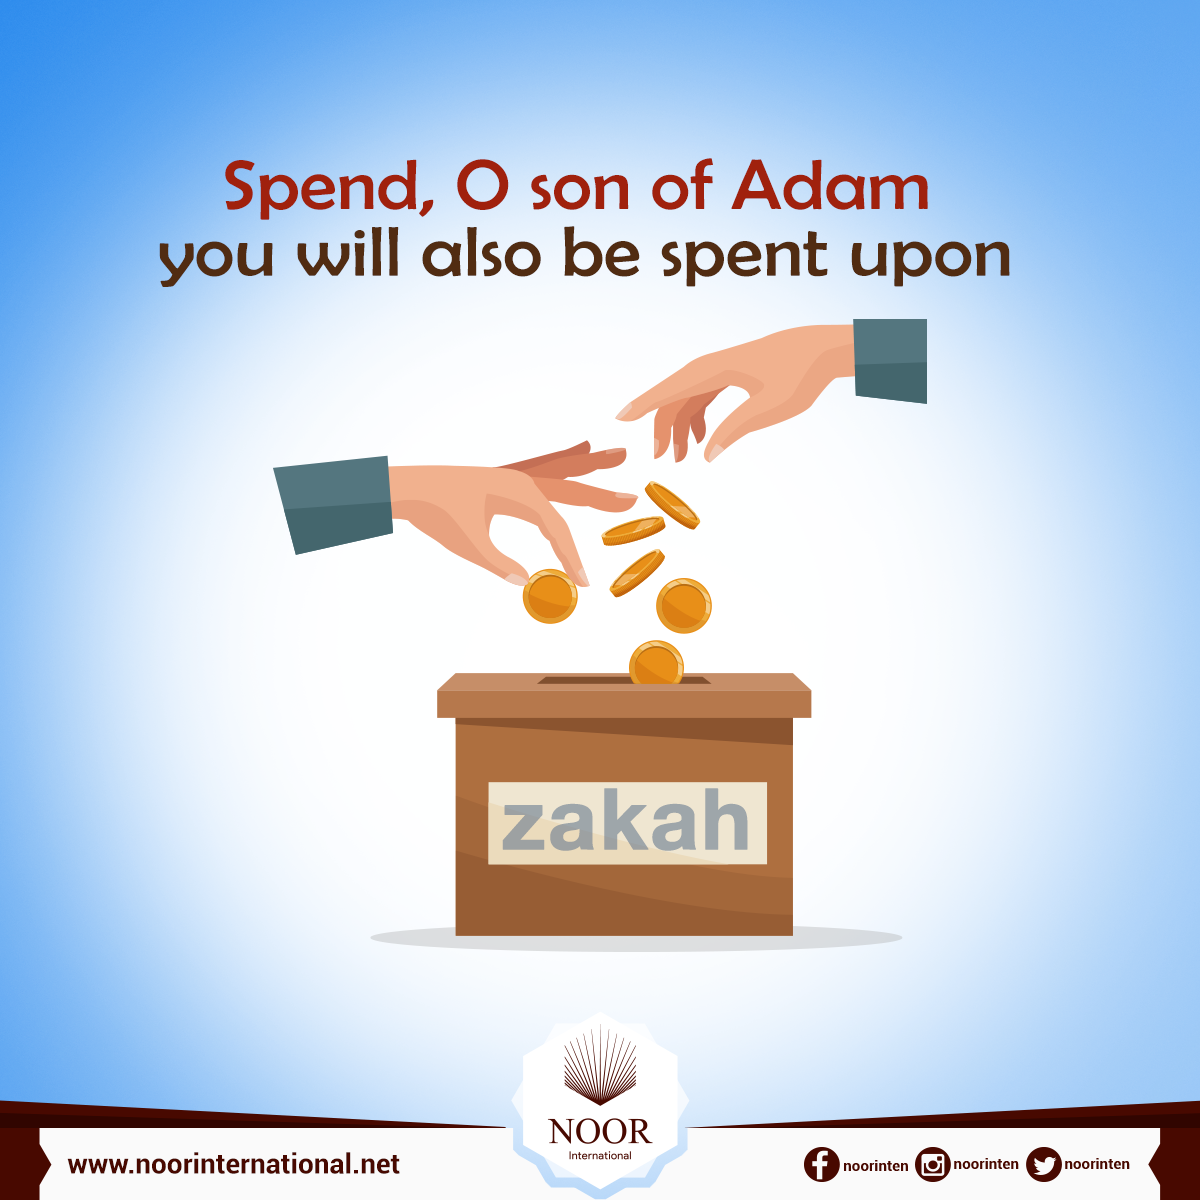 Spend, O son of Adam, you will also be spent upon.